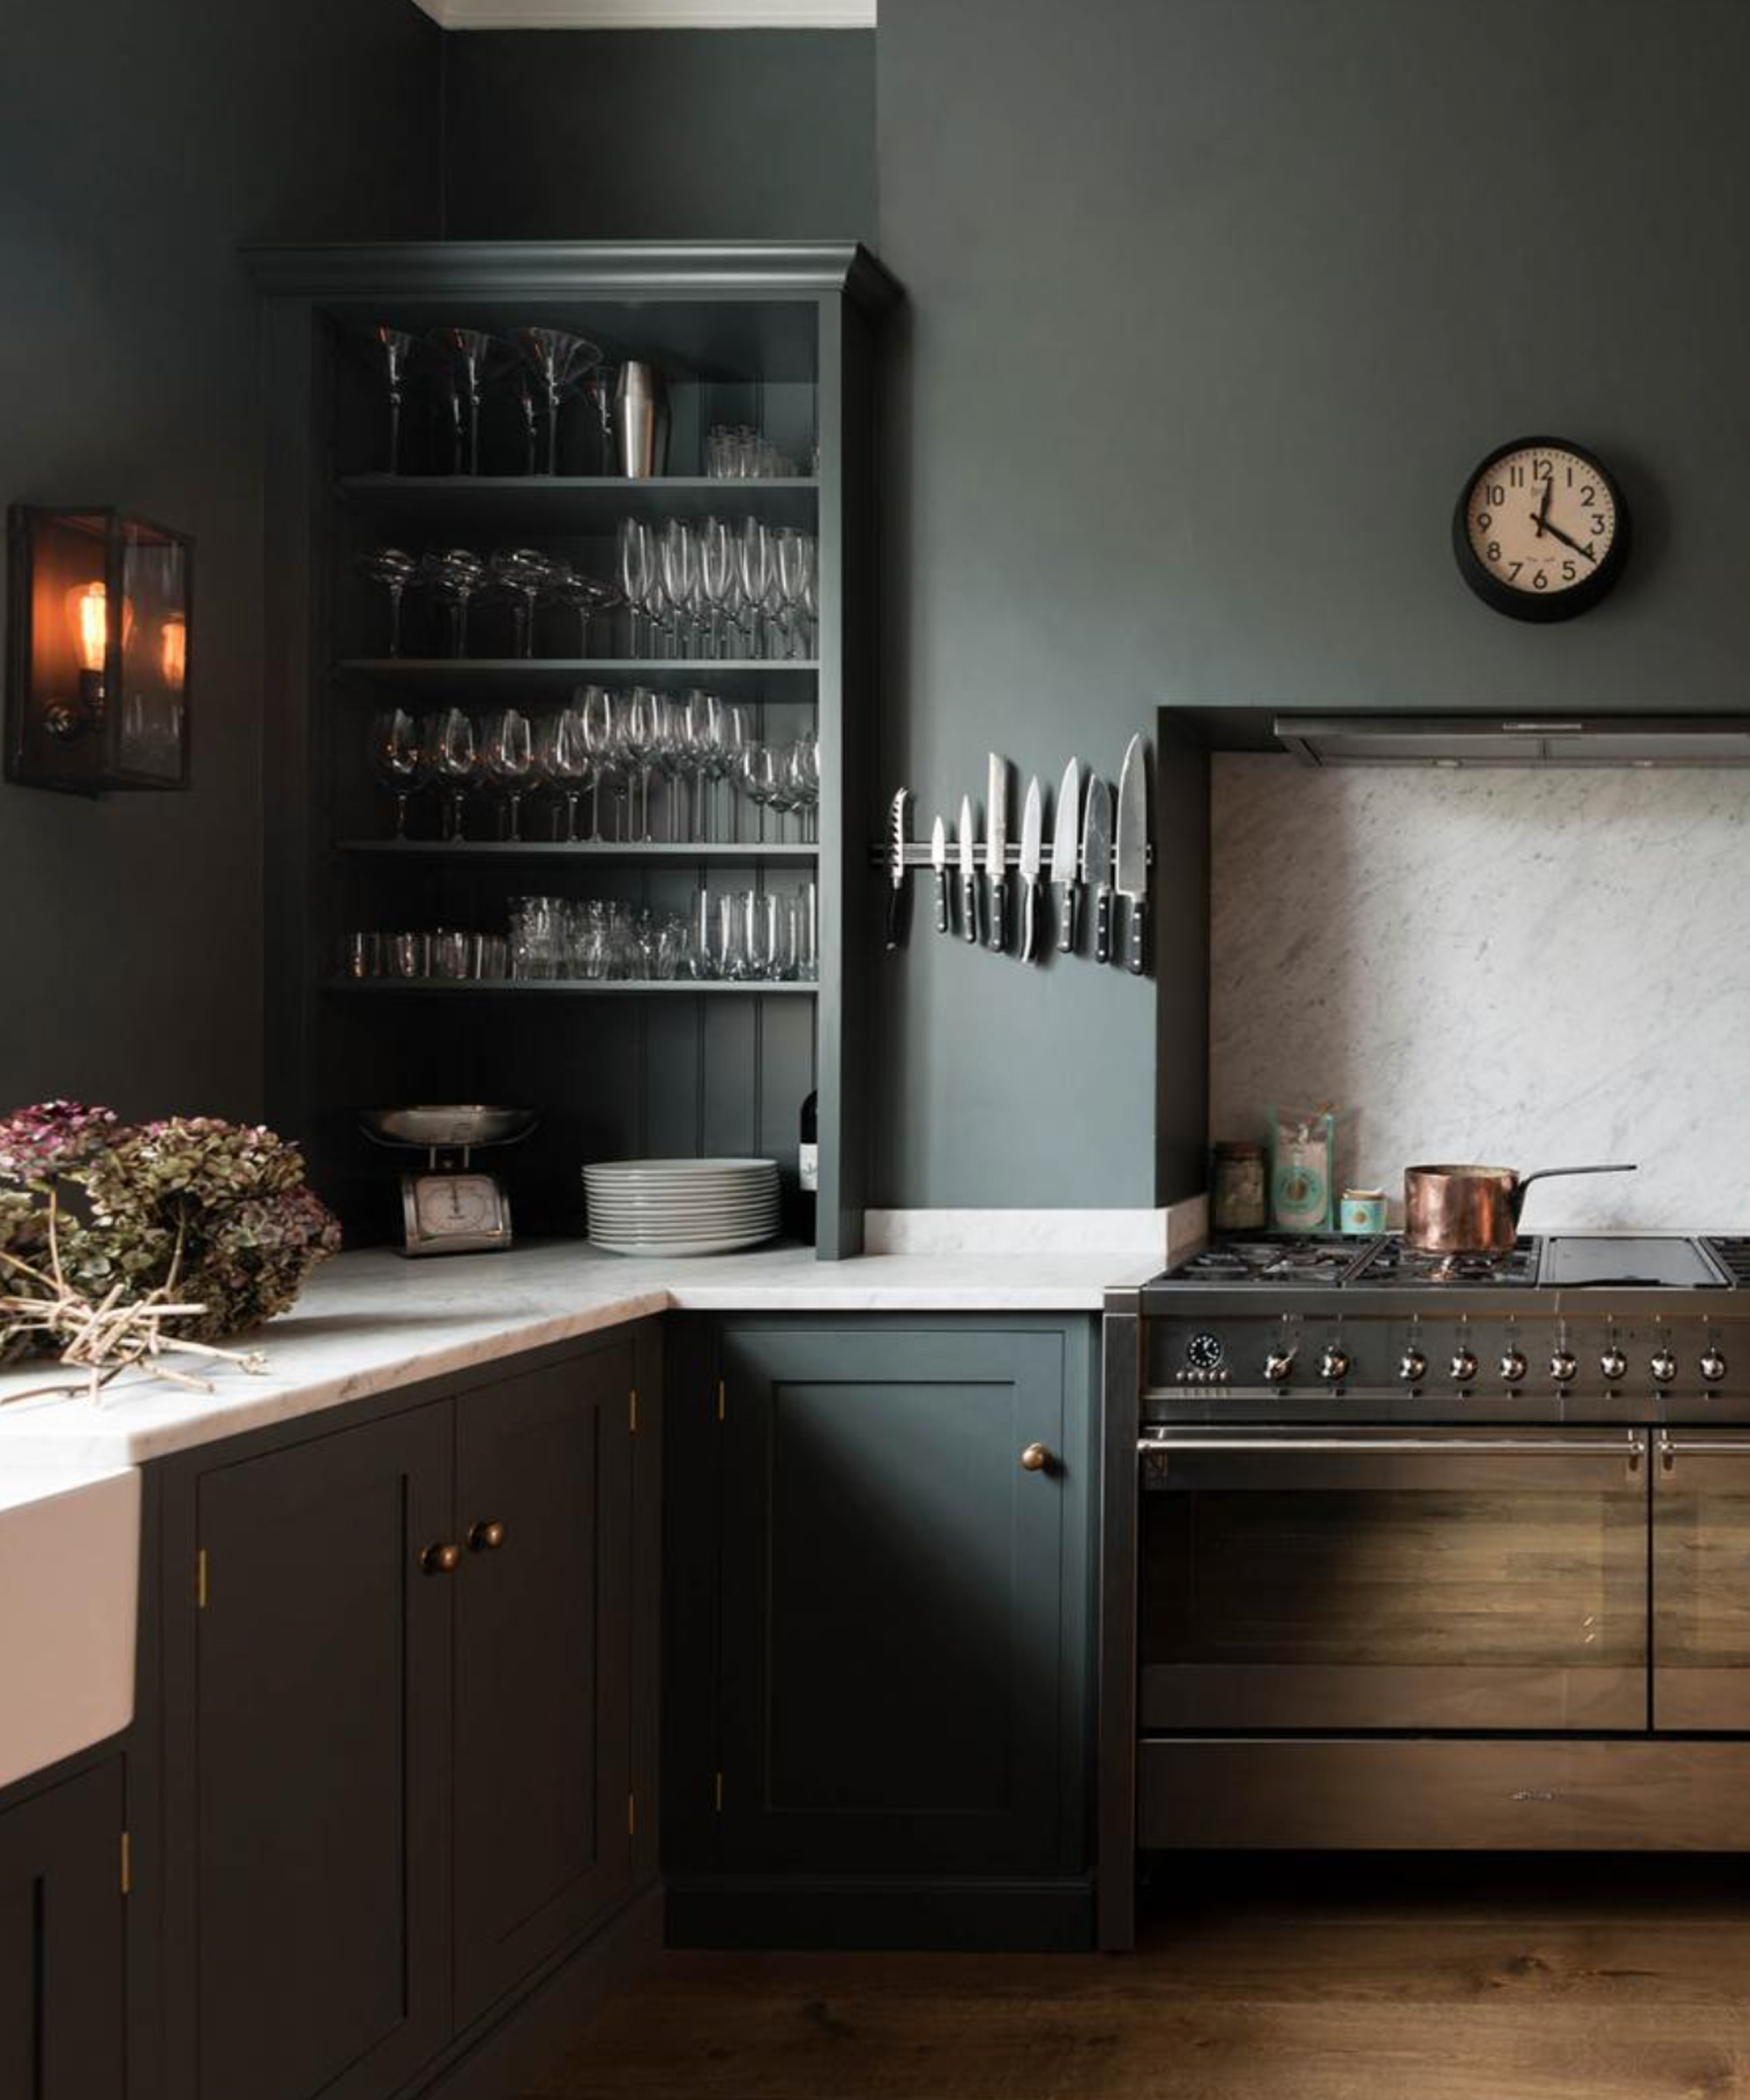 Grey kitchen ideas   designers explain how to use this color ...